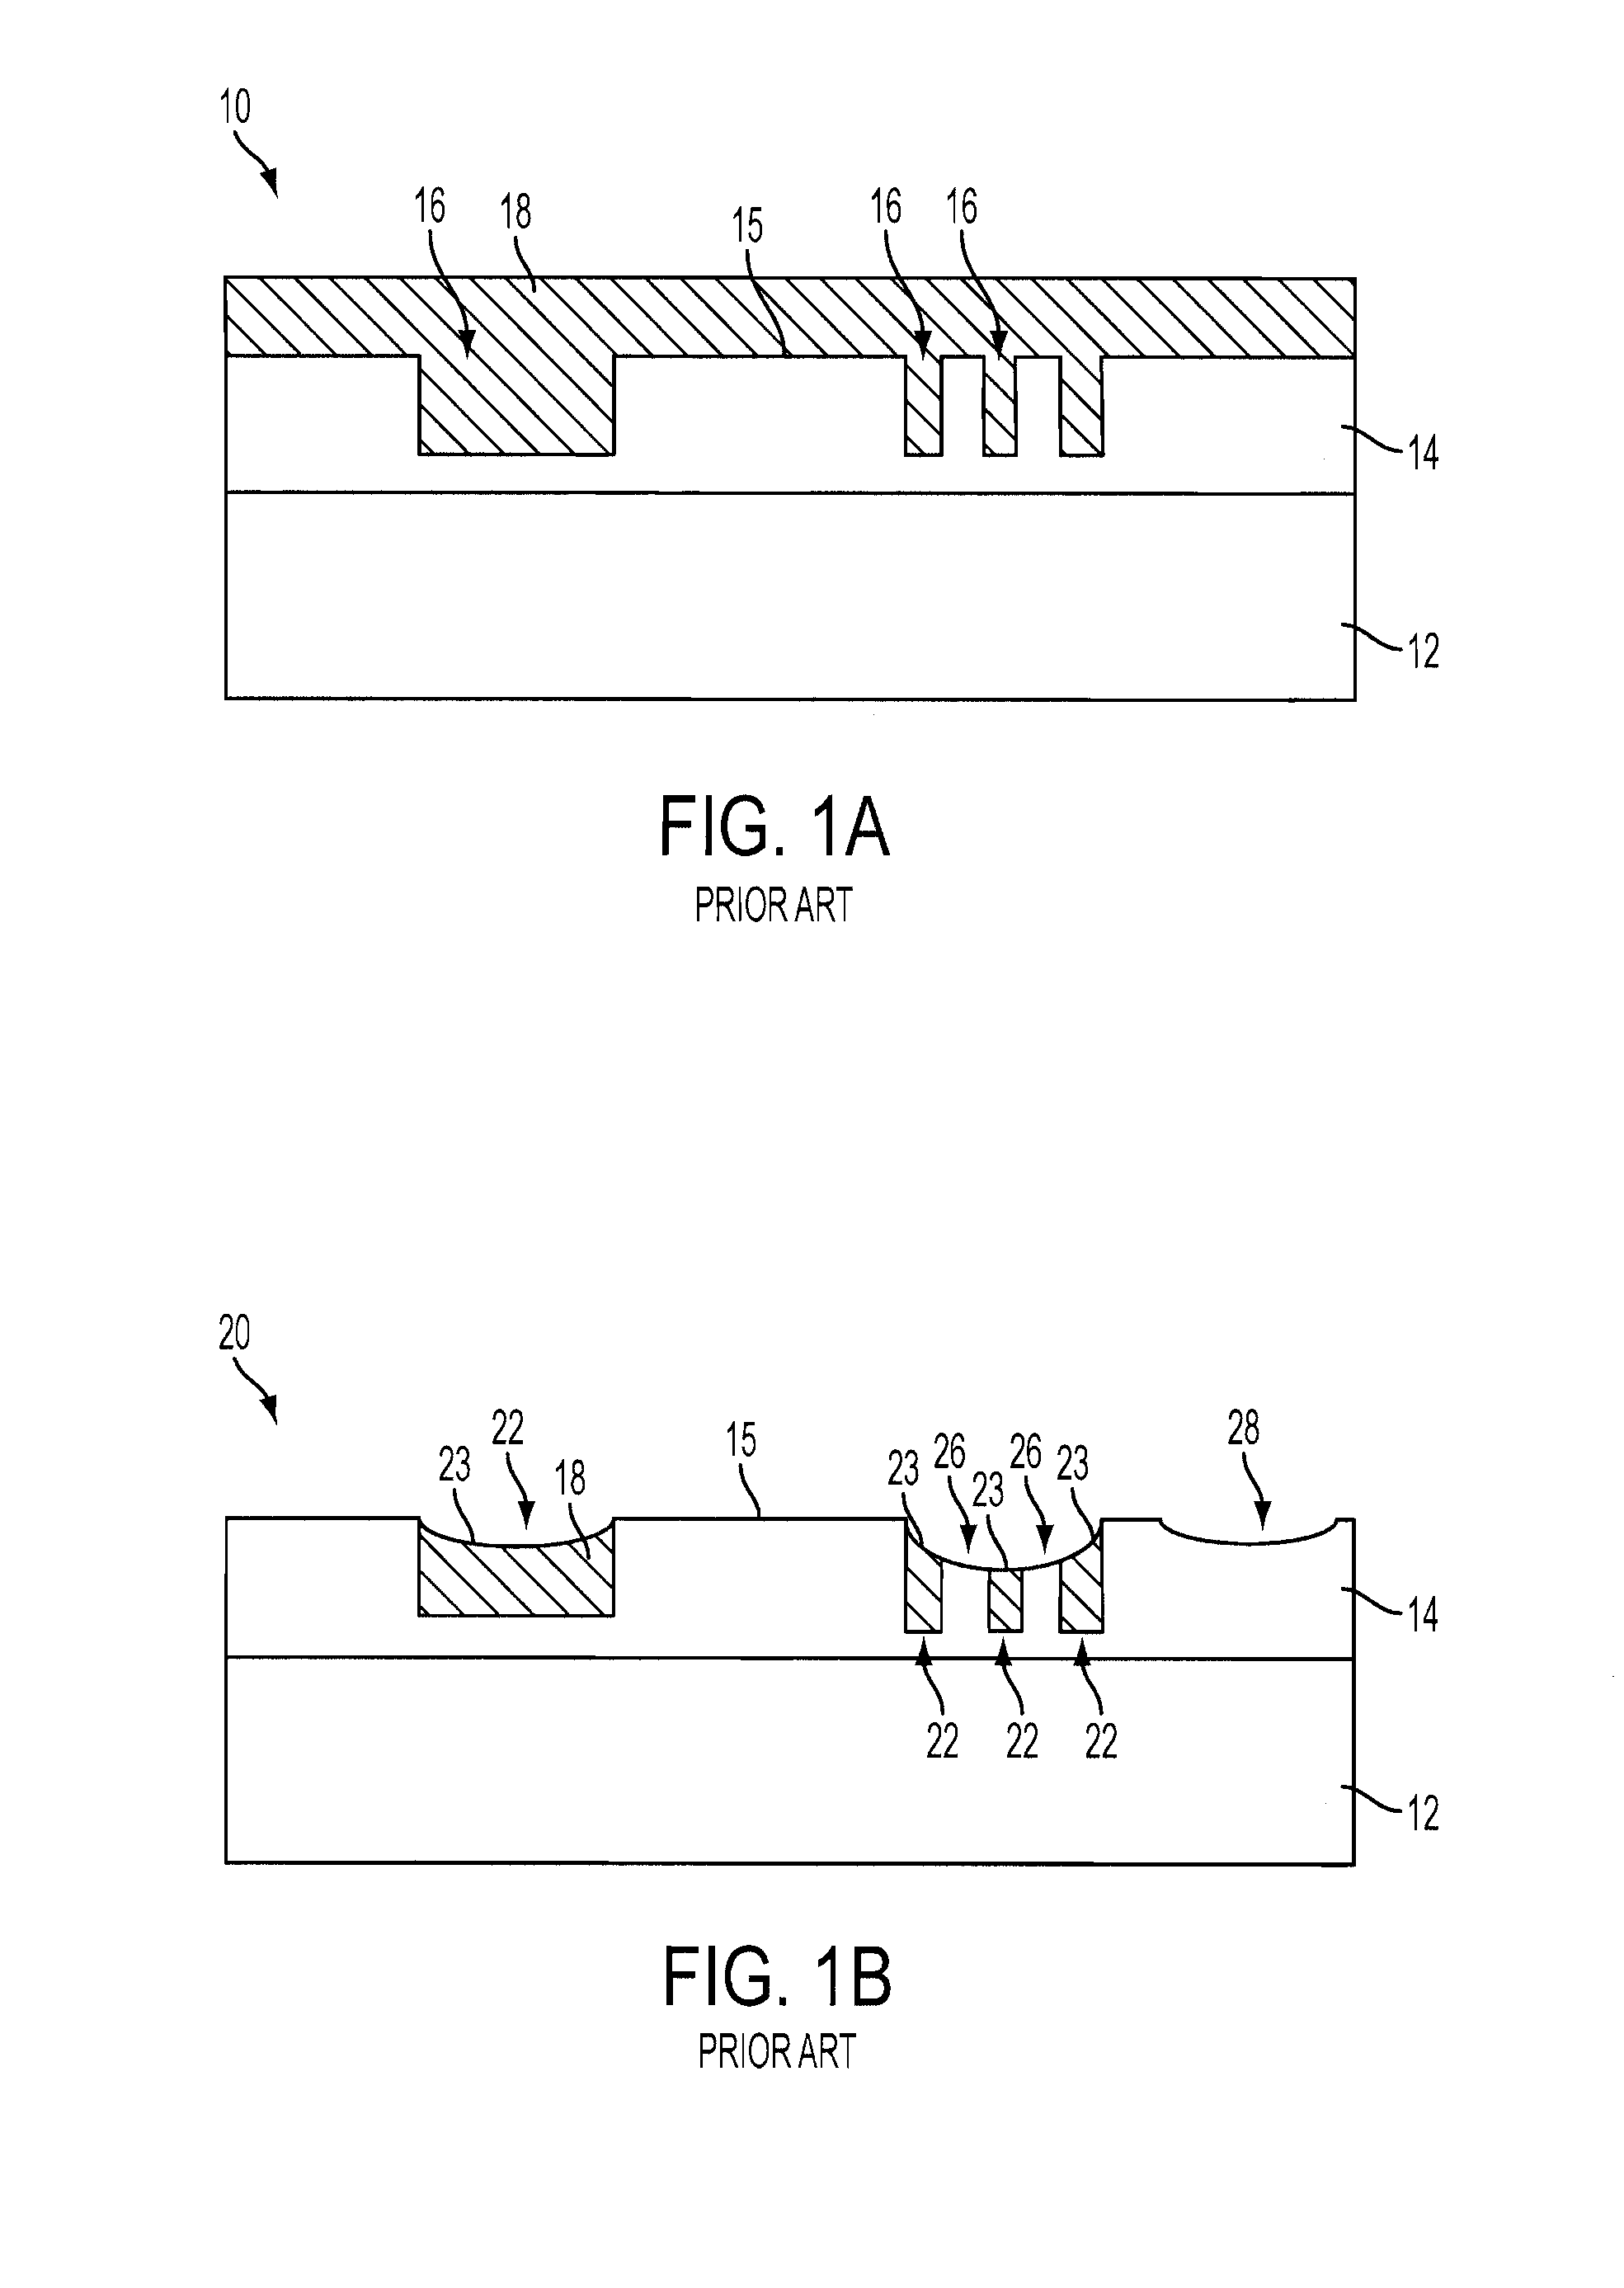 Bonding surfaces for direct bonding of semiconductor structures